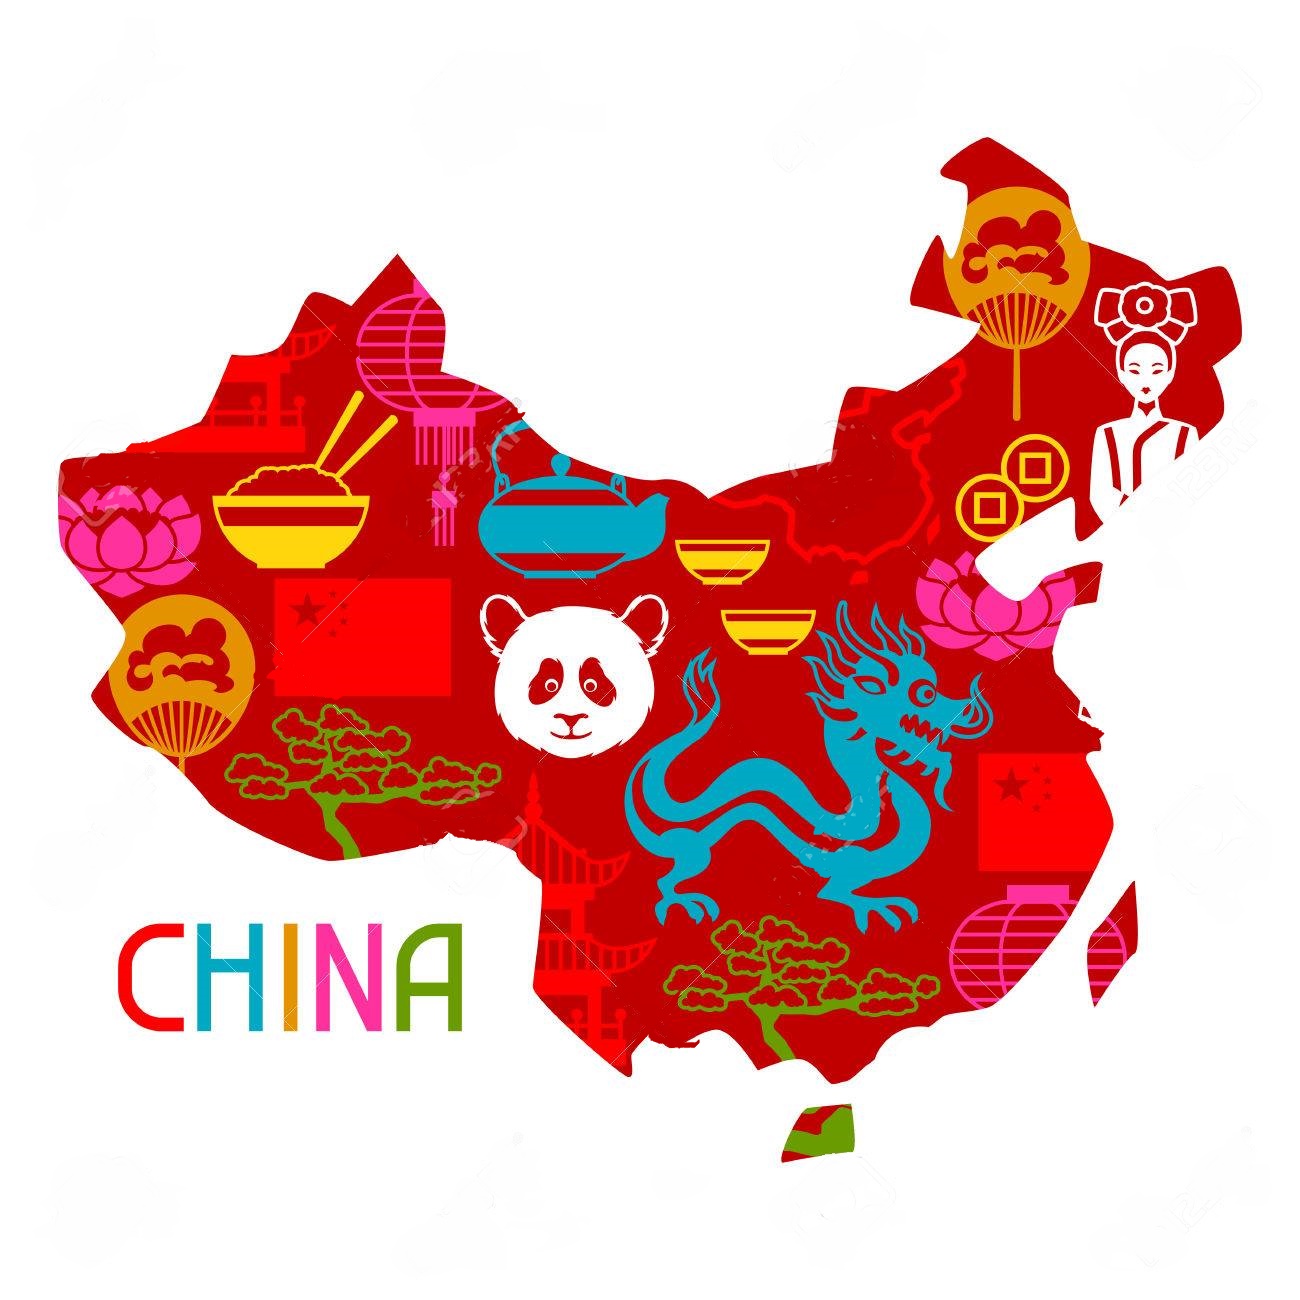 China map design. Chinese symbols and objects